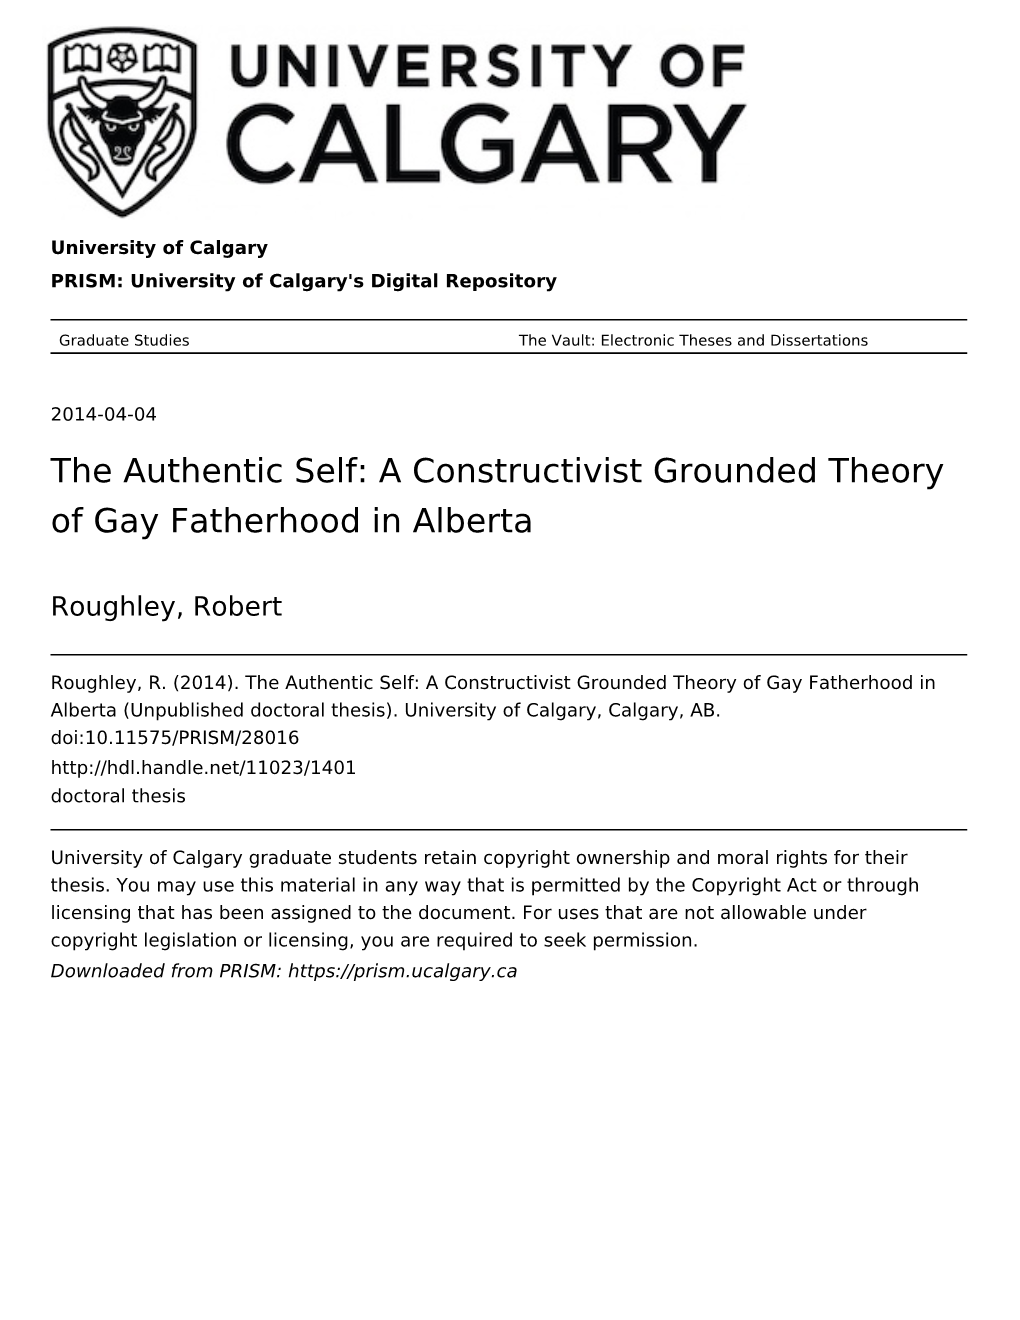 A Constructivist Grounded Theory of Gay Fatherhood in Alberta